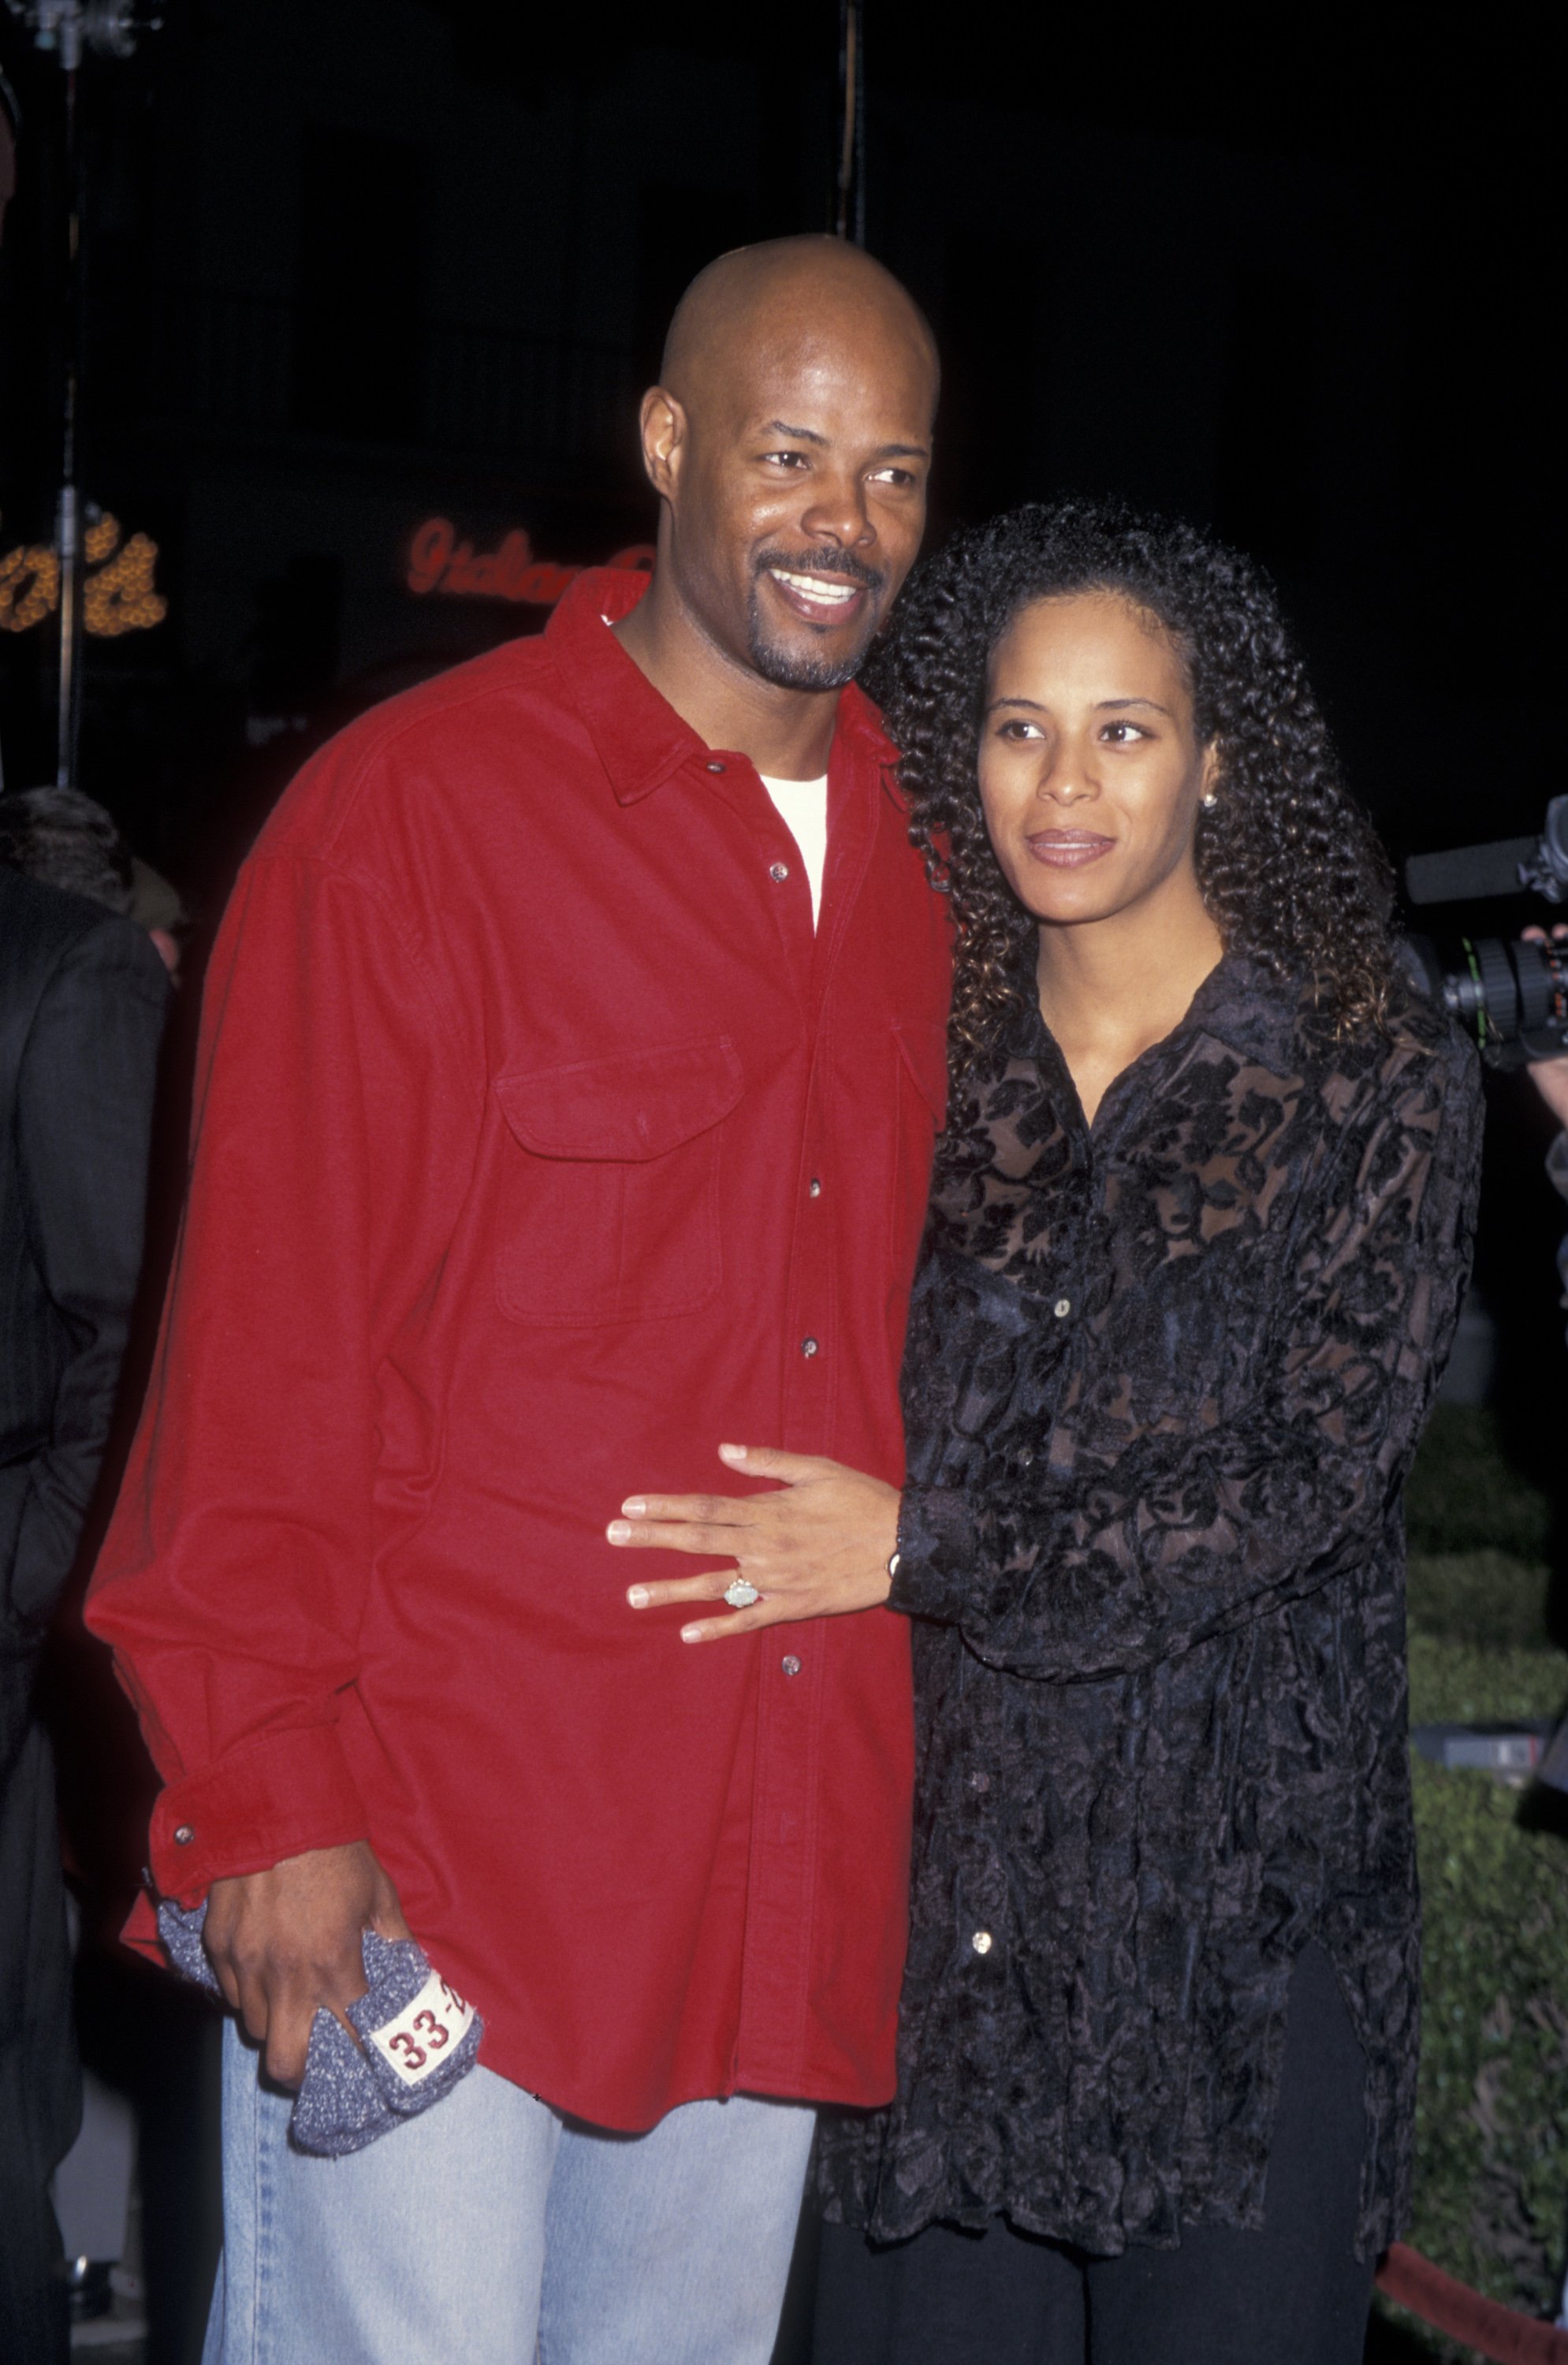 Keenen Ivory Wayans and wife Daphne Polk attending the world premiere of 'Executive Decision' on March 11, 1996 | Photo: Getty Images